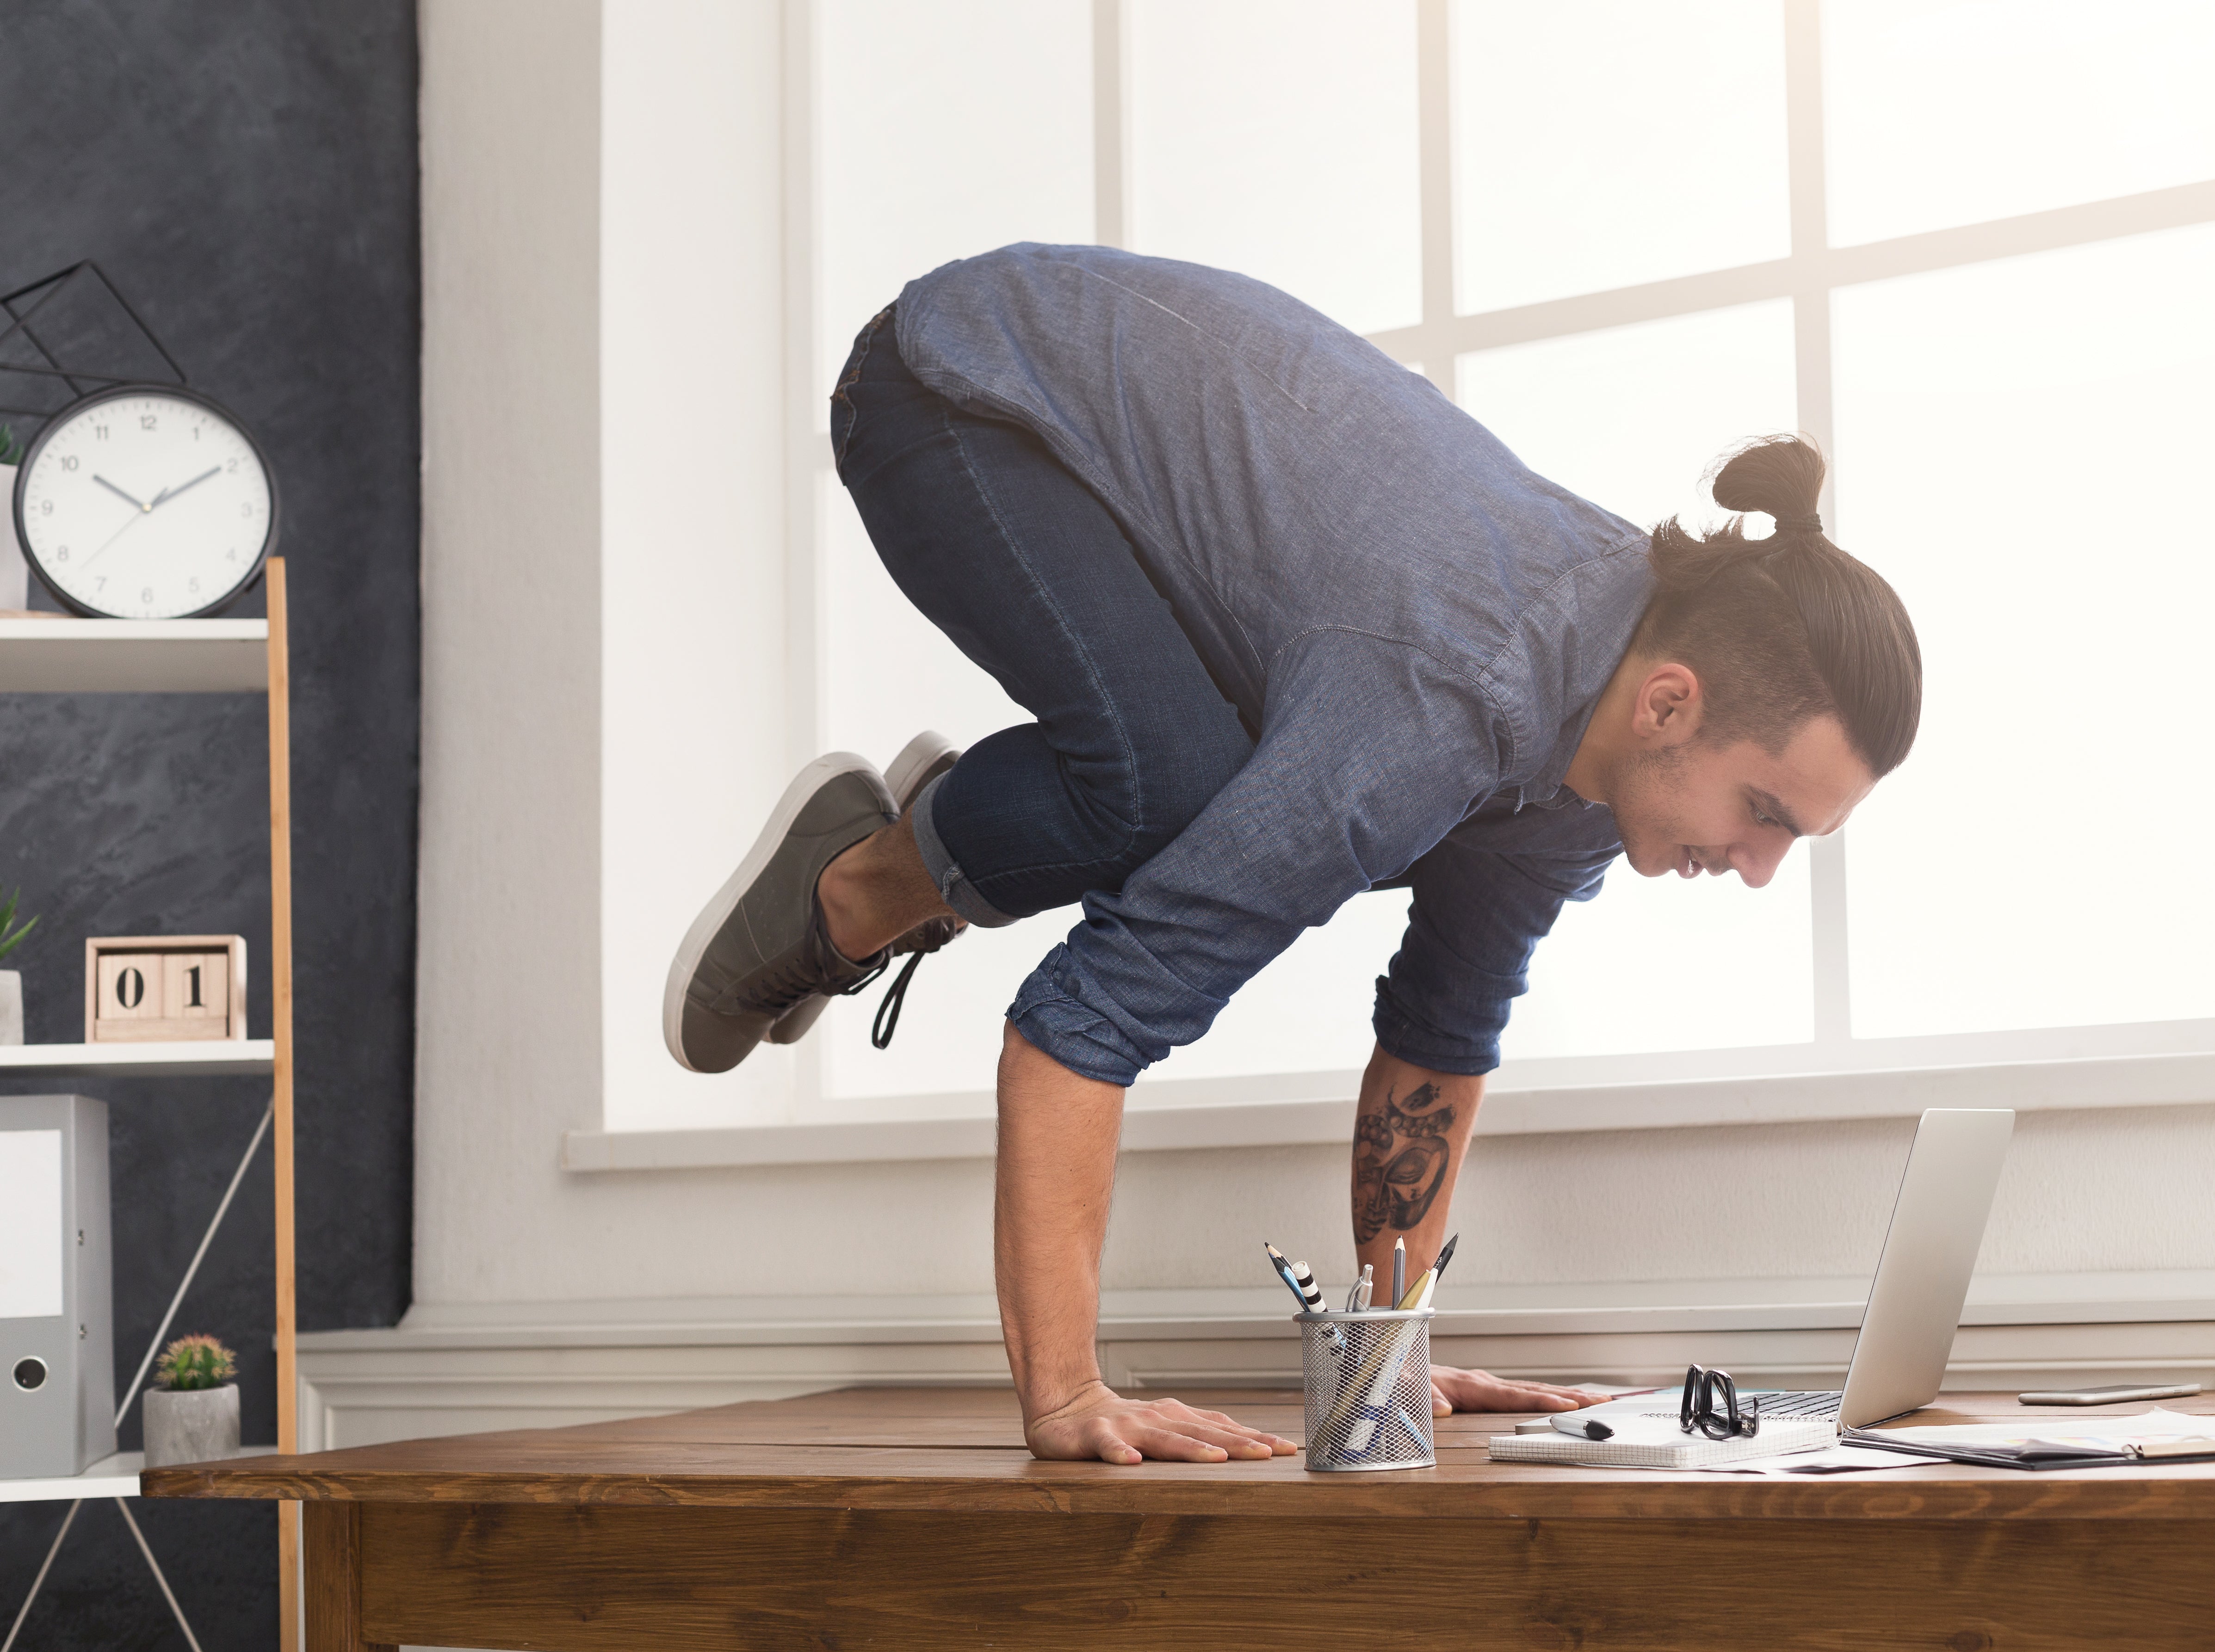 Not moving enough in your work day? Try desk yoga!